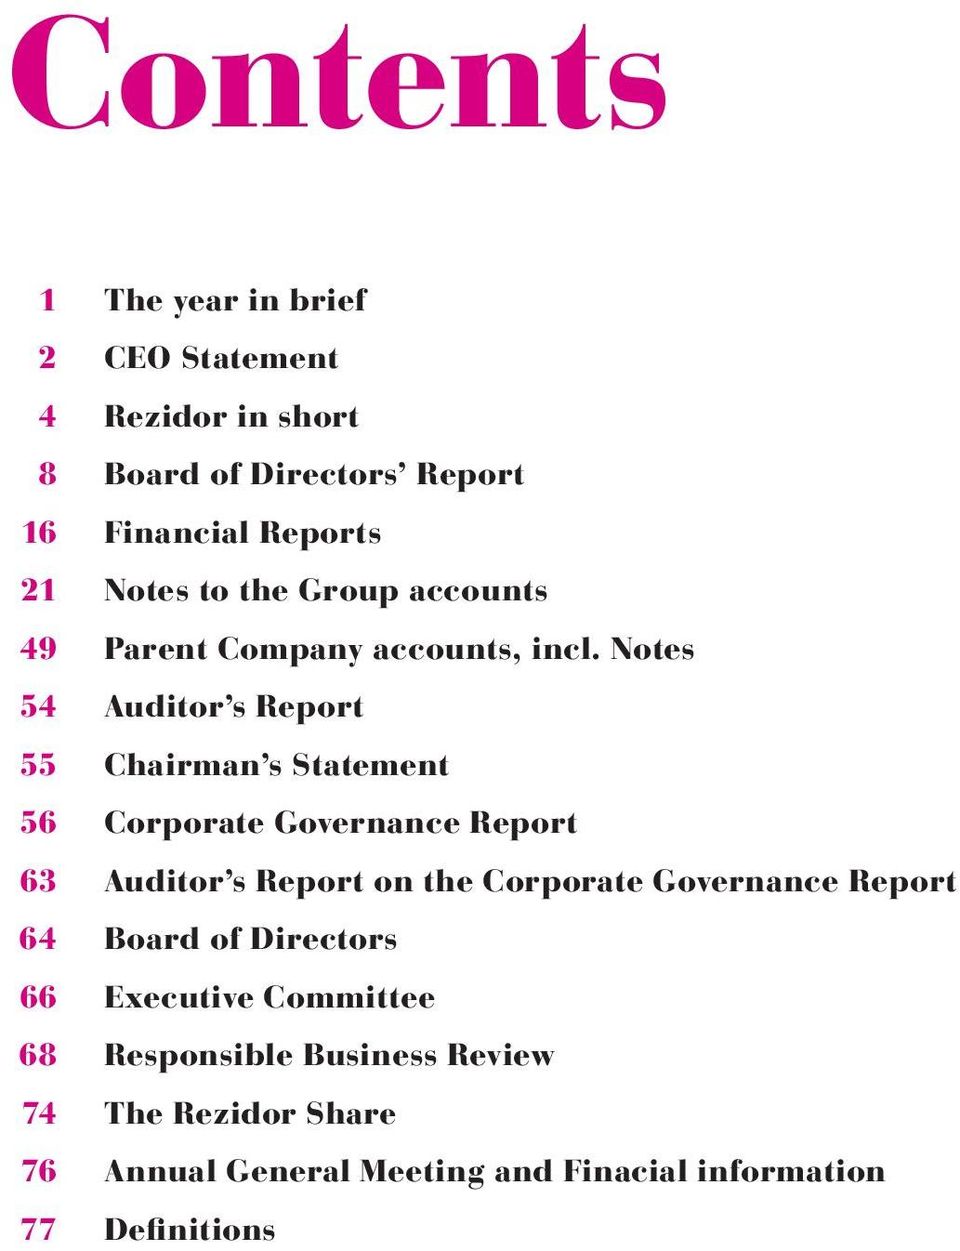 Notes 54 Auditor s Report 55 Chairman s Statement 56 Corporate Governance Report 63 Auditor s Report on the Corporate